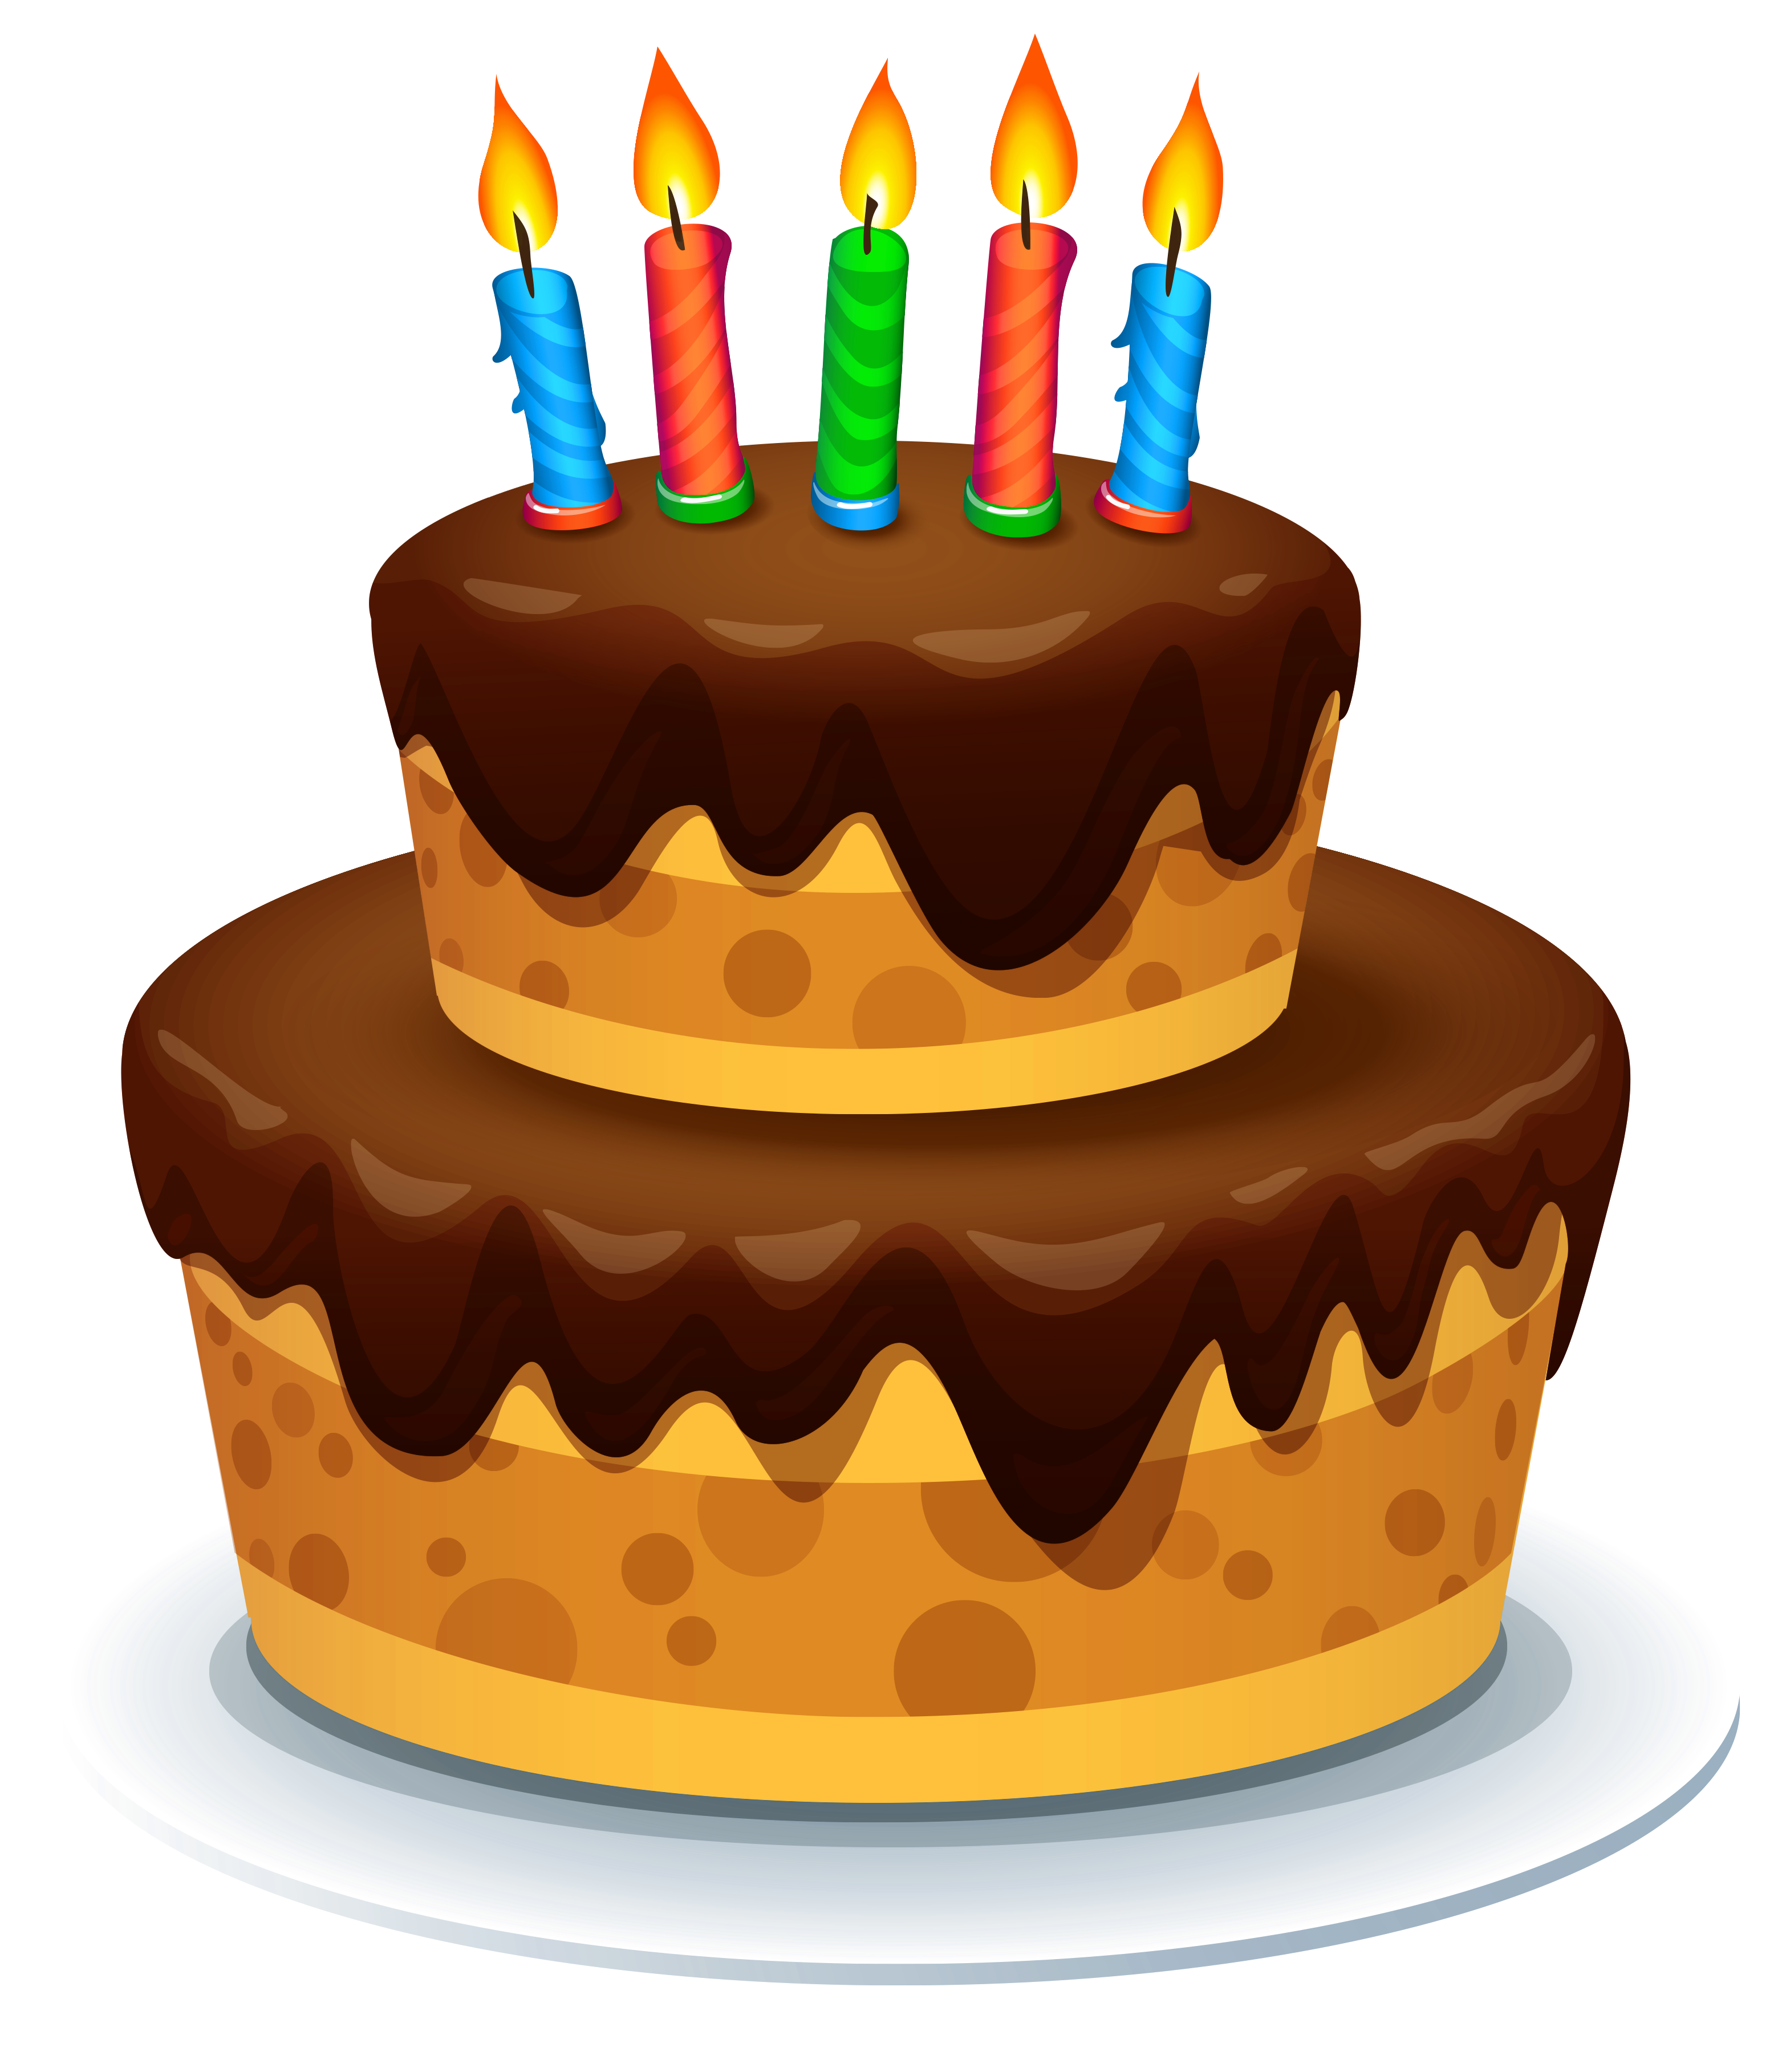 Birthday Cake PNG Transparent Background And Clipart Image For Free  Download - Lovepik | 401153900